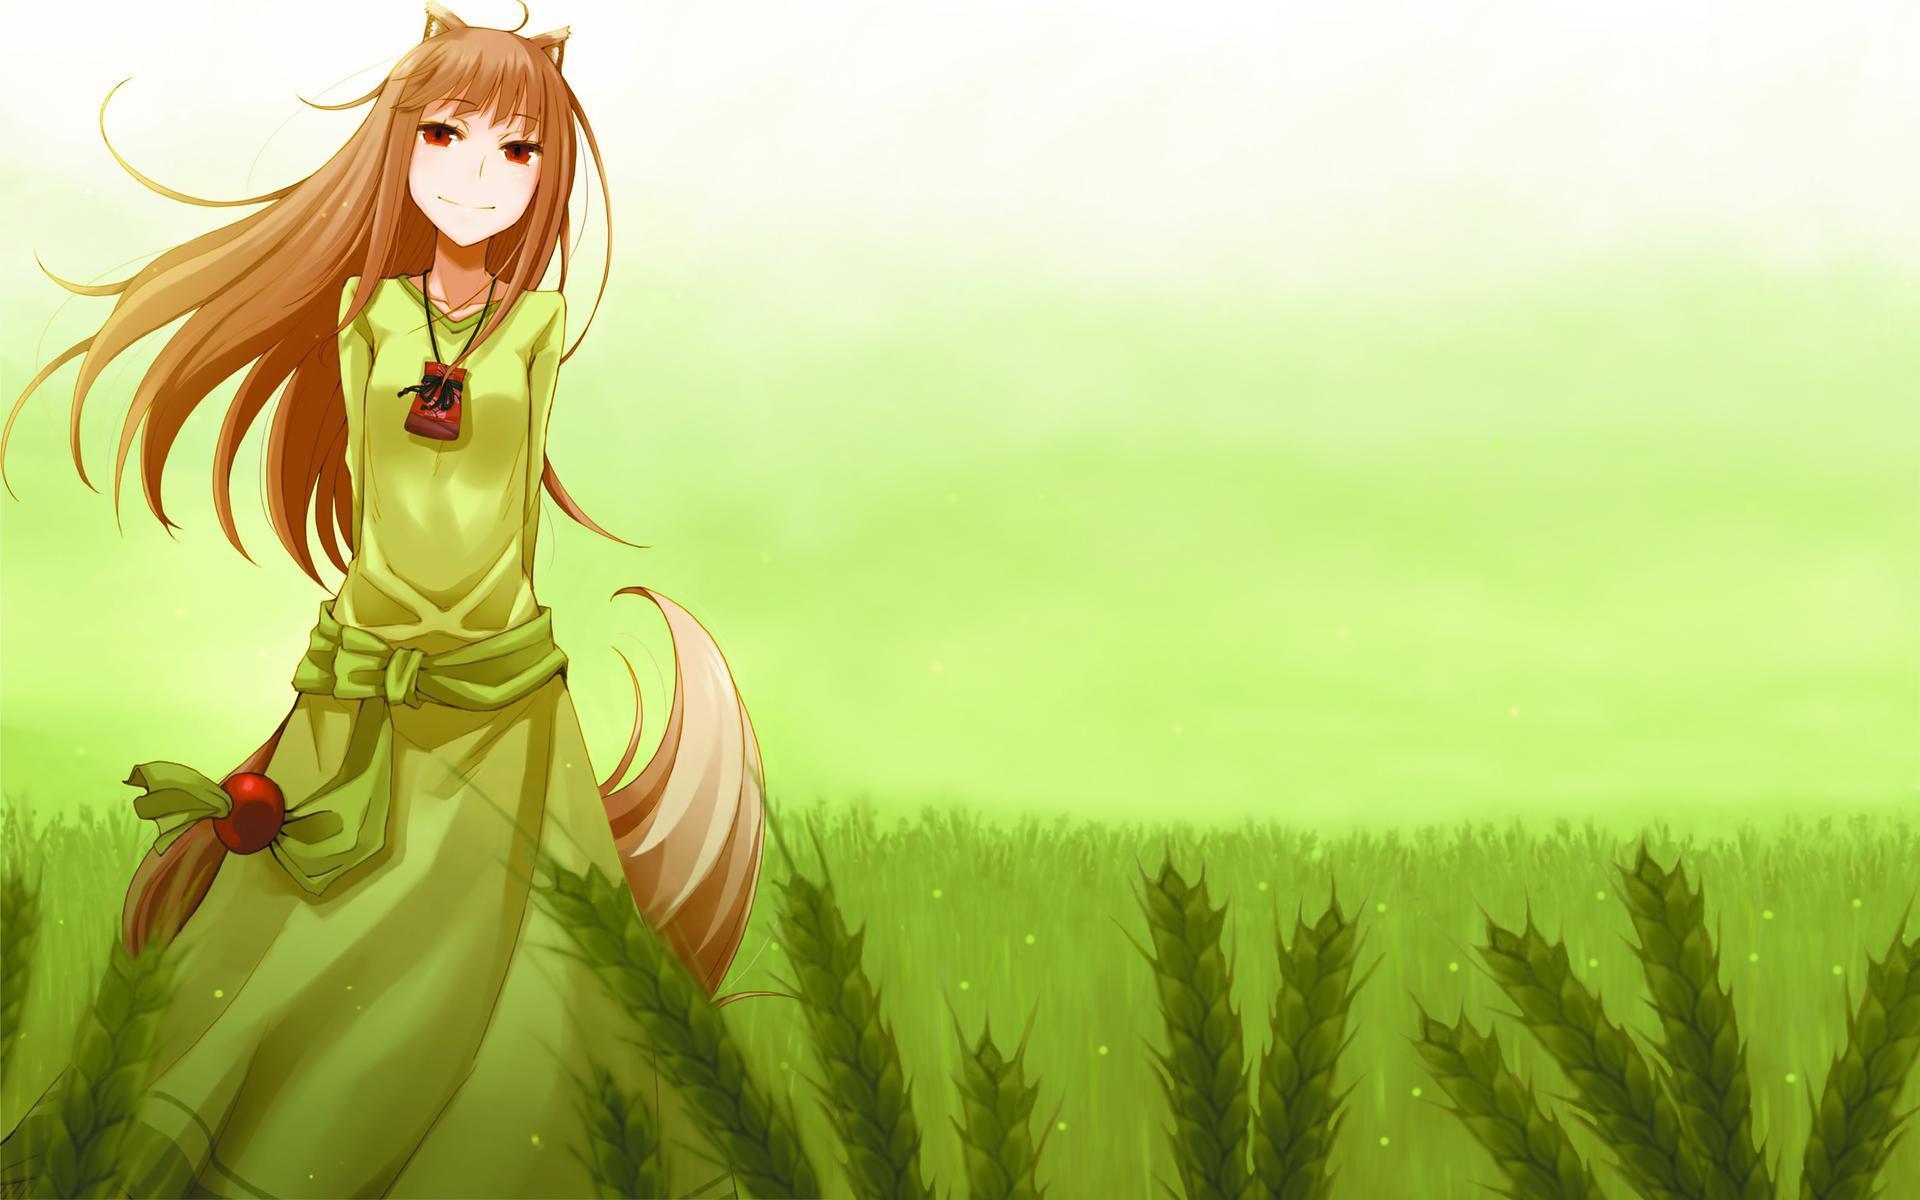 Holo Walking In The Grass Wallpaper